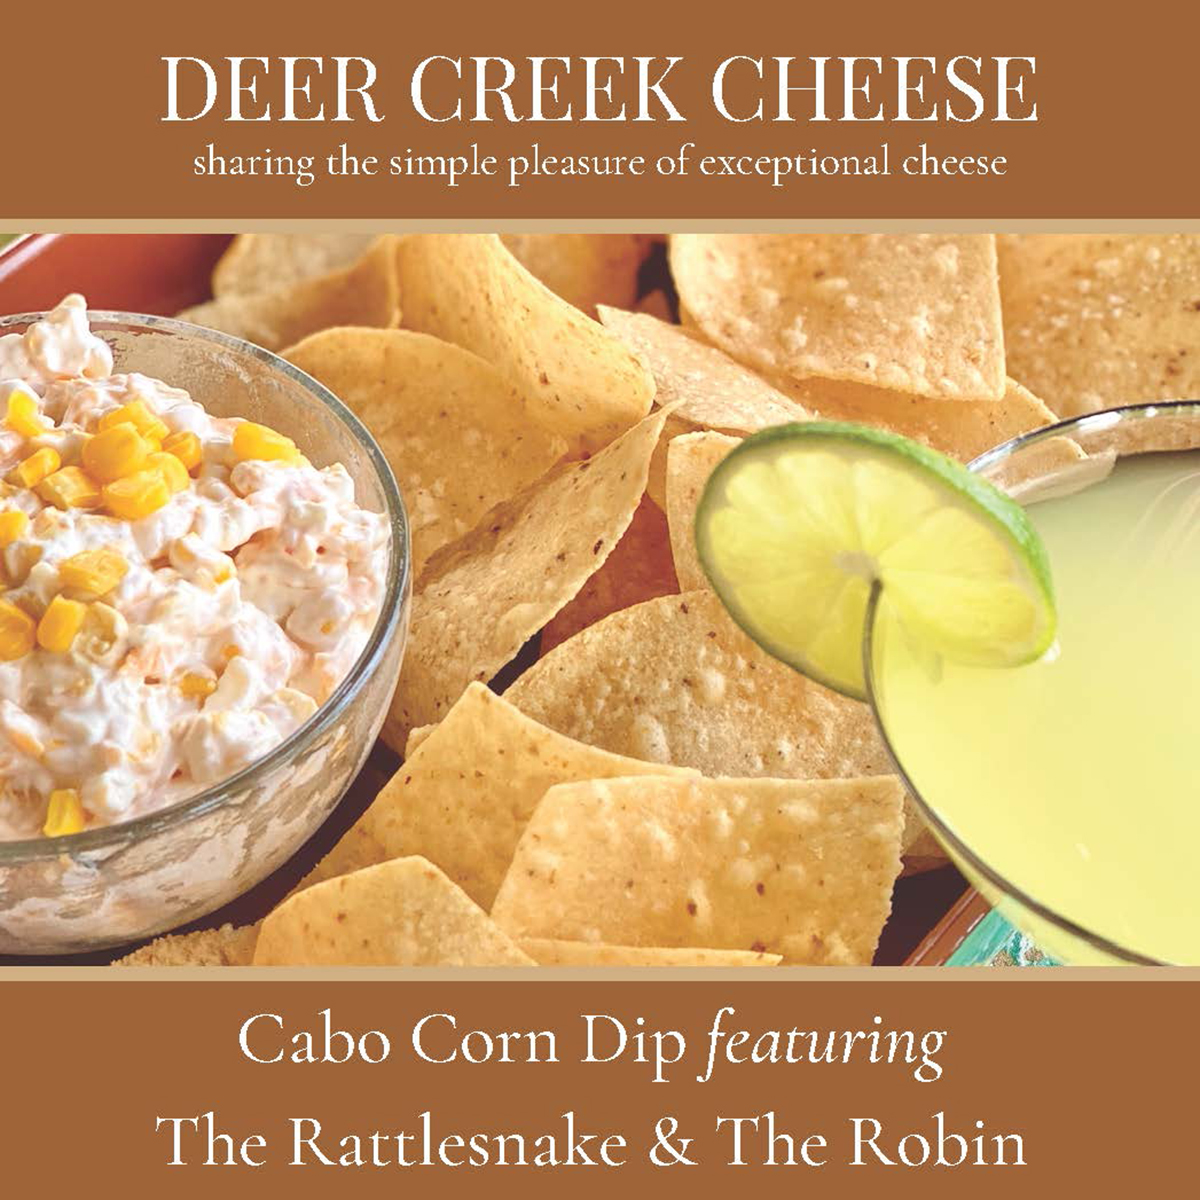 Click this image of the recipe card to download your copy of the Deer Creek Cheese Cabo Corn Dip Recipe.